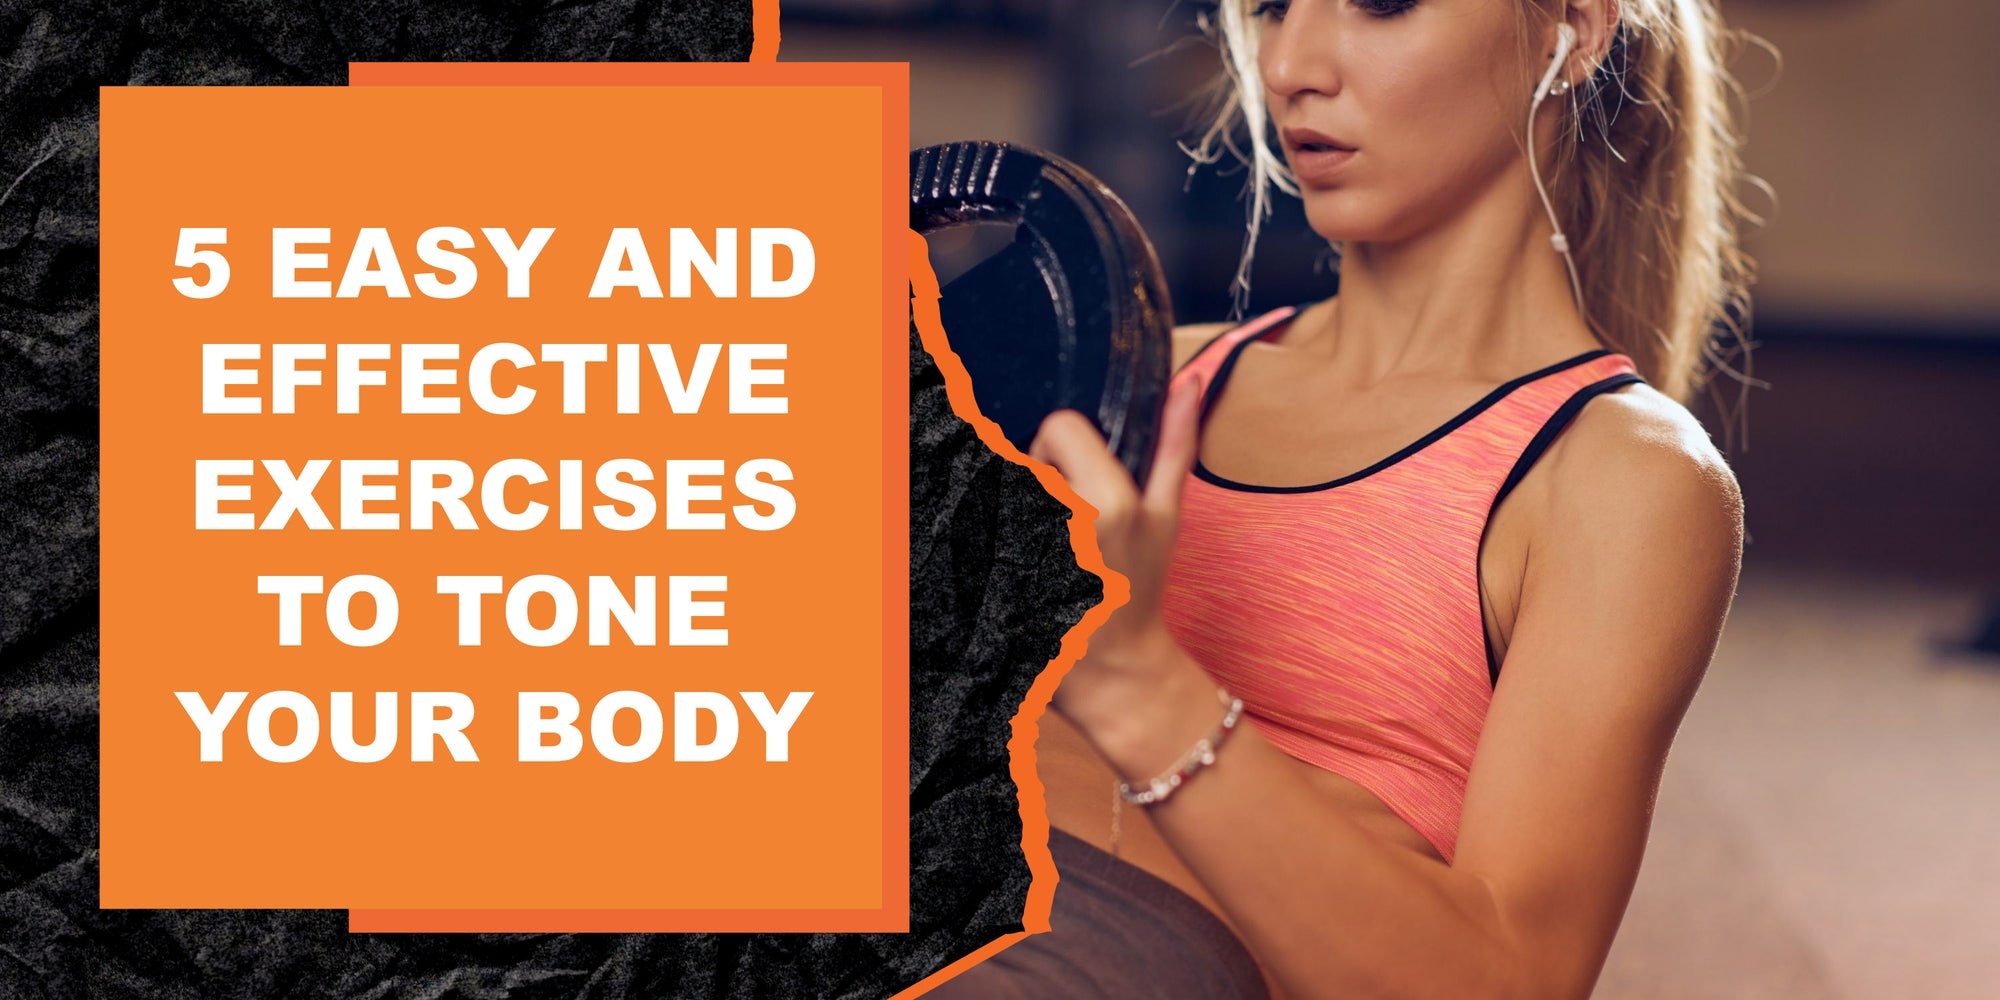 5 Easy and Effective Exercises to Tone Your Body